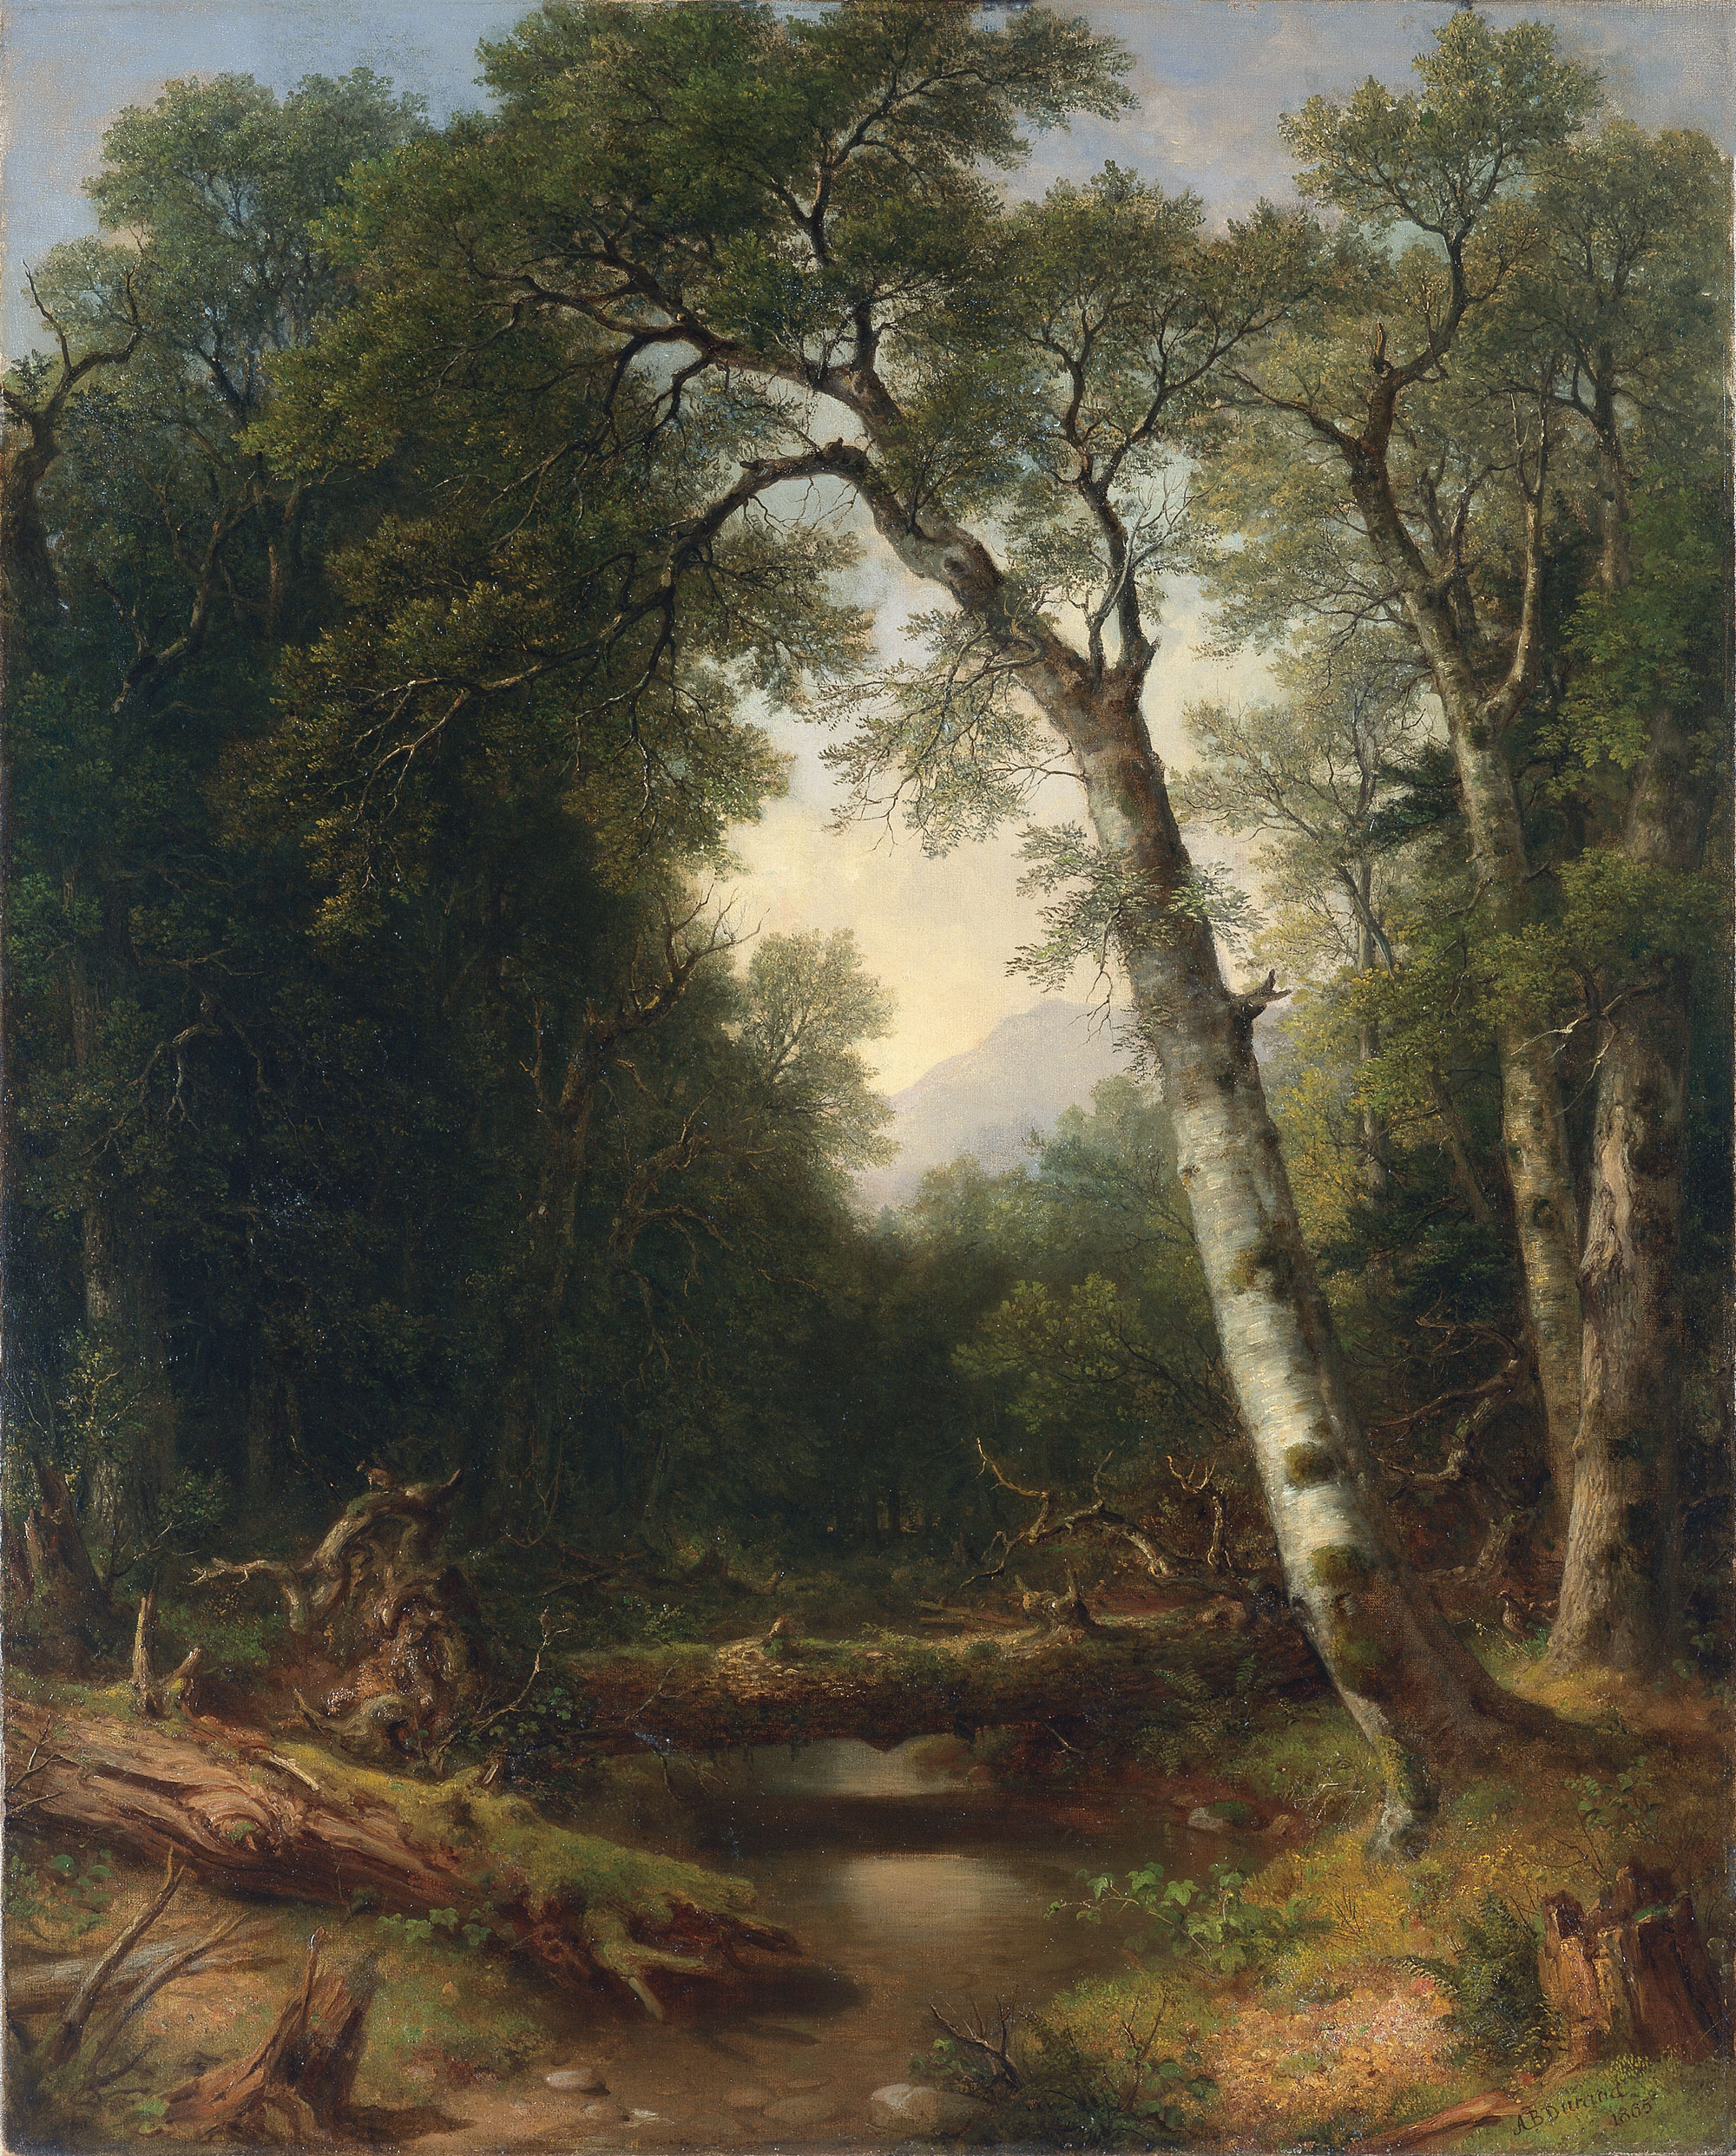 Asher Brown Durand - A Creek in the Woods (1865)